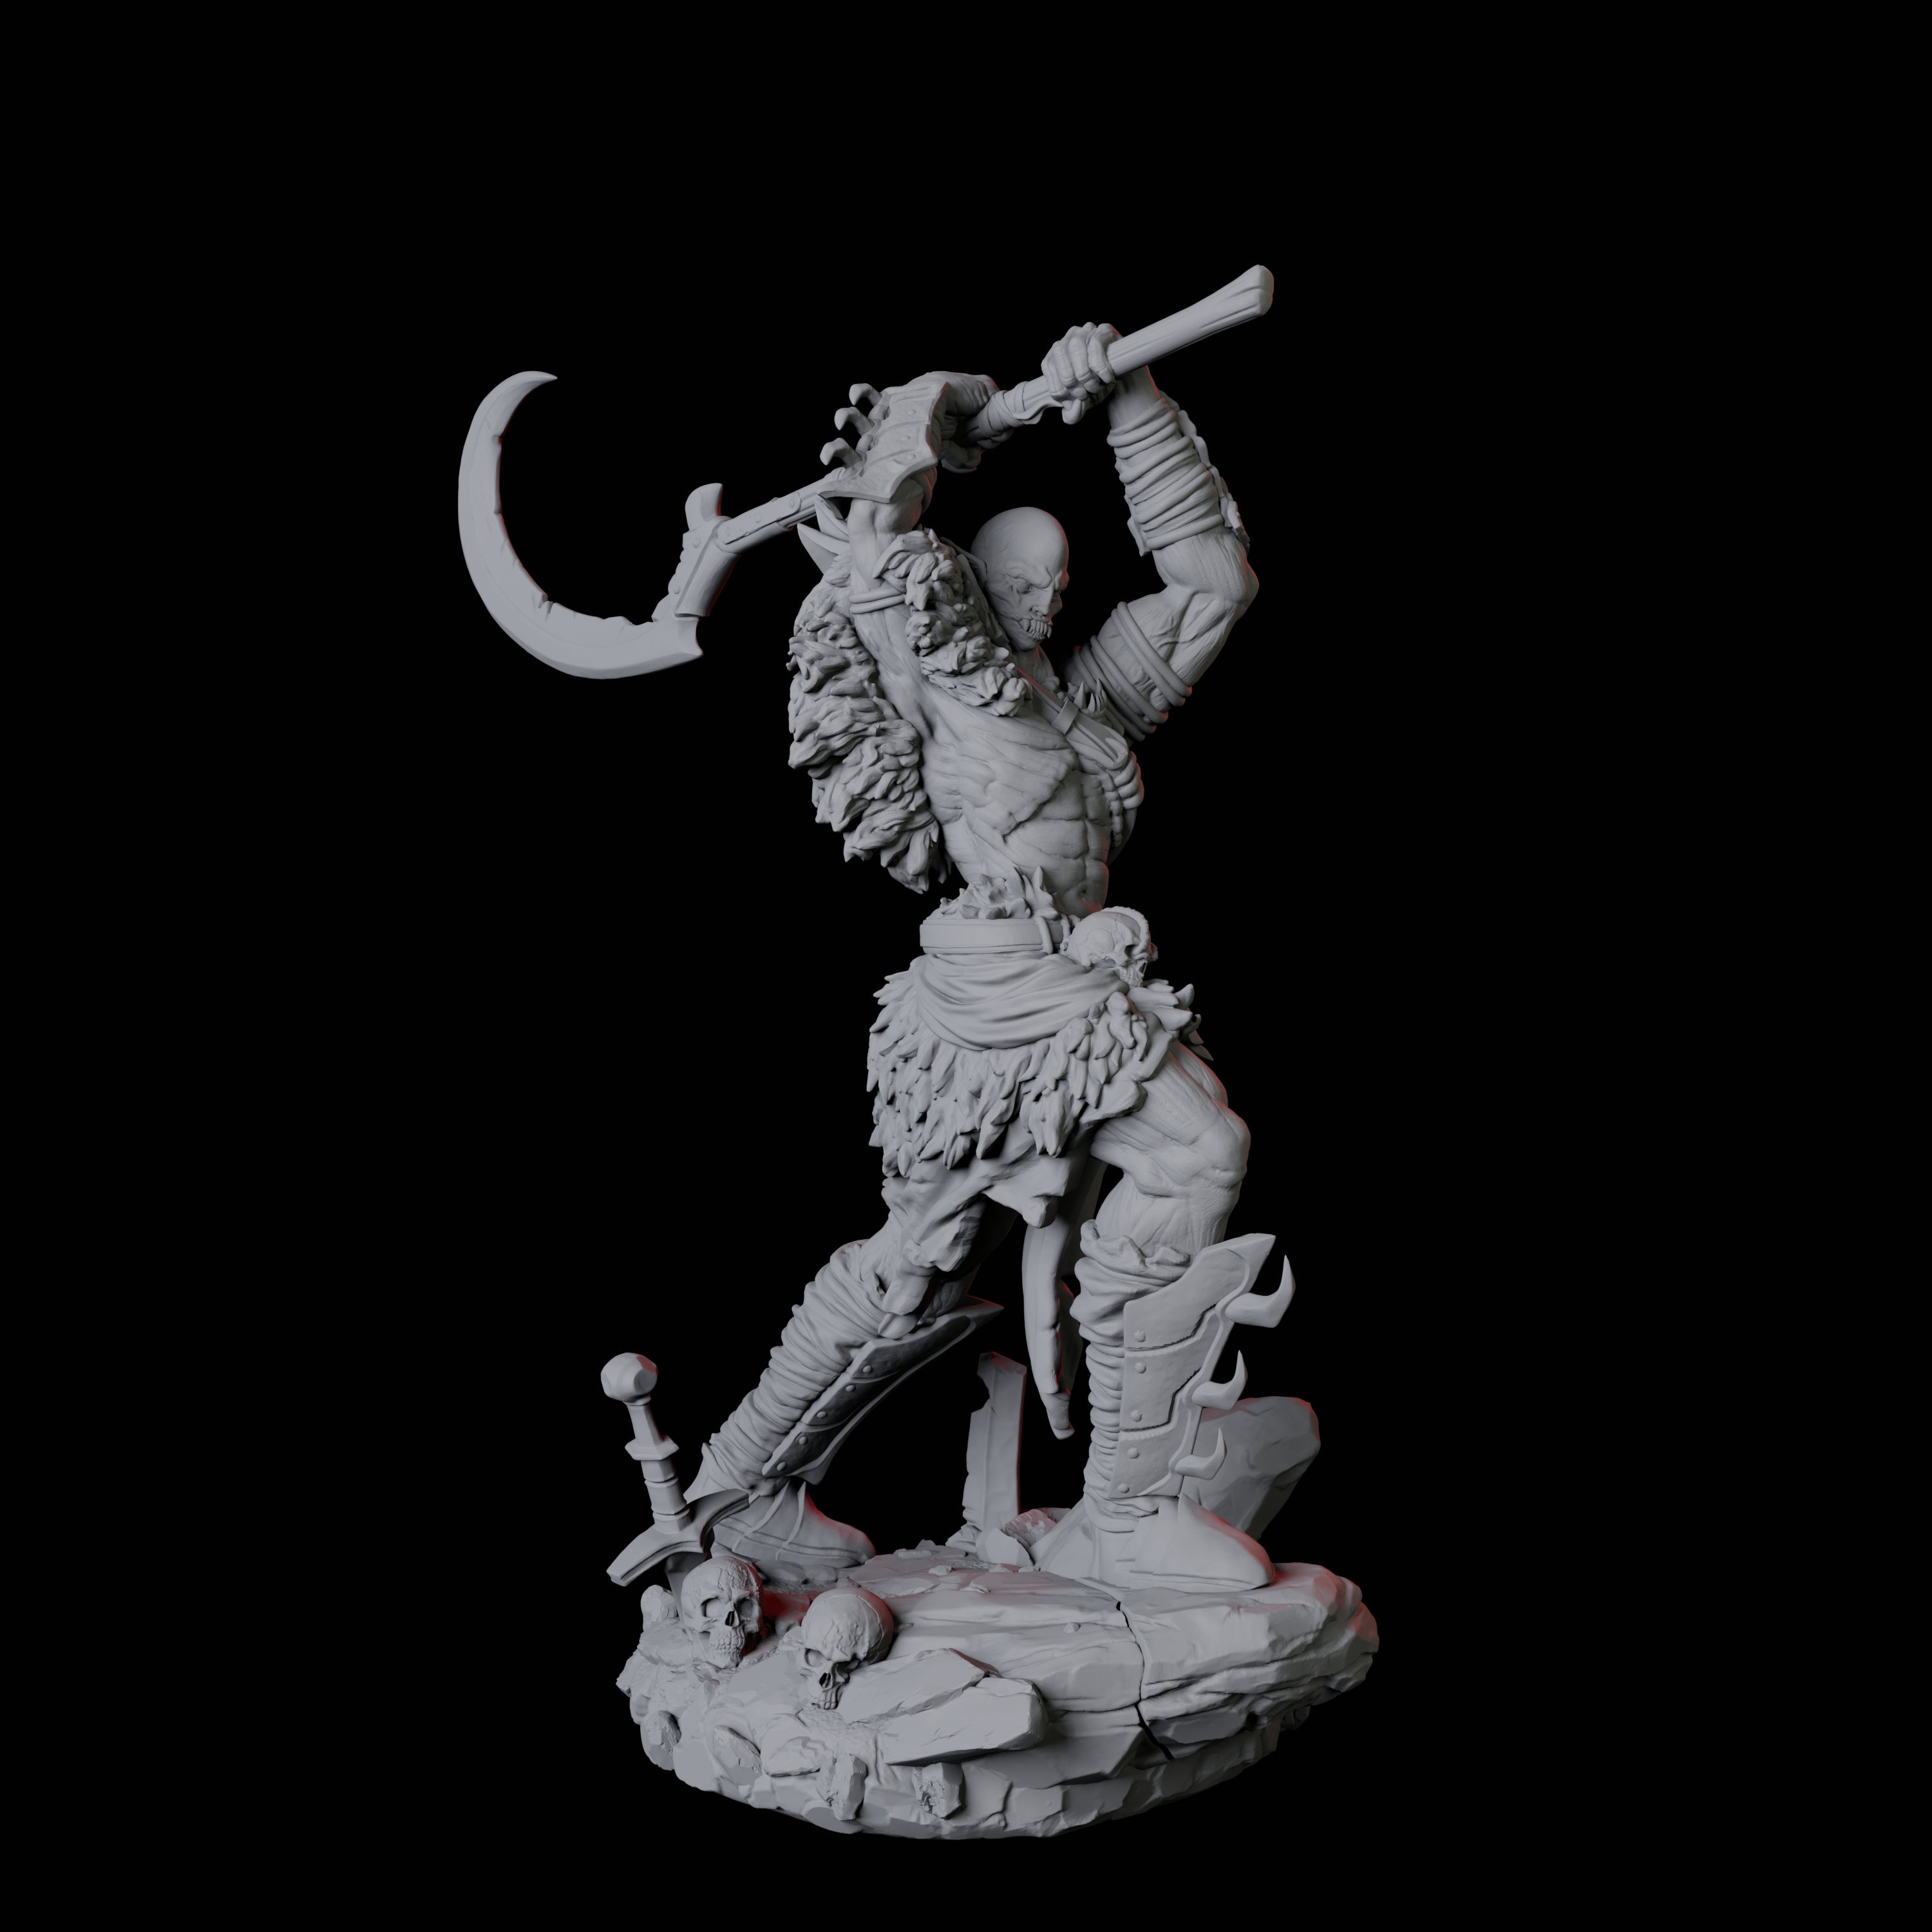 Stalking Urdefhan Warrior D Miniature for Dungeons and Dragons, Pathfinder or other TTRPGs